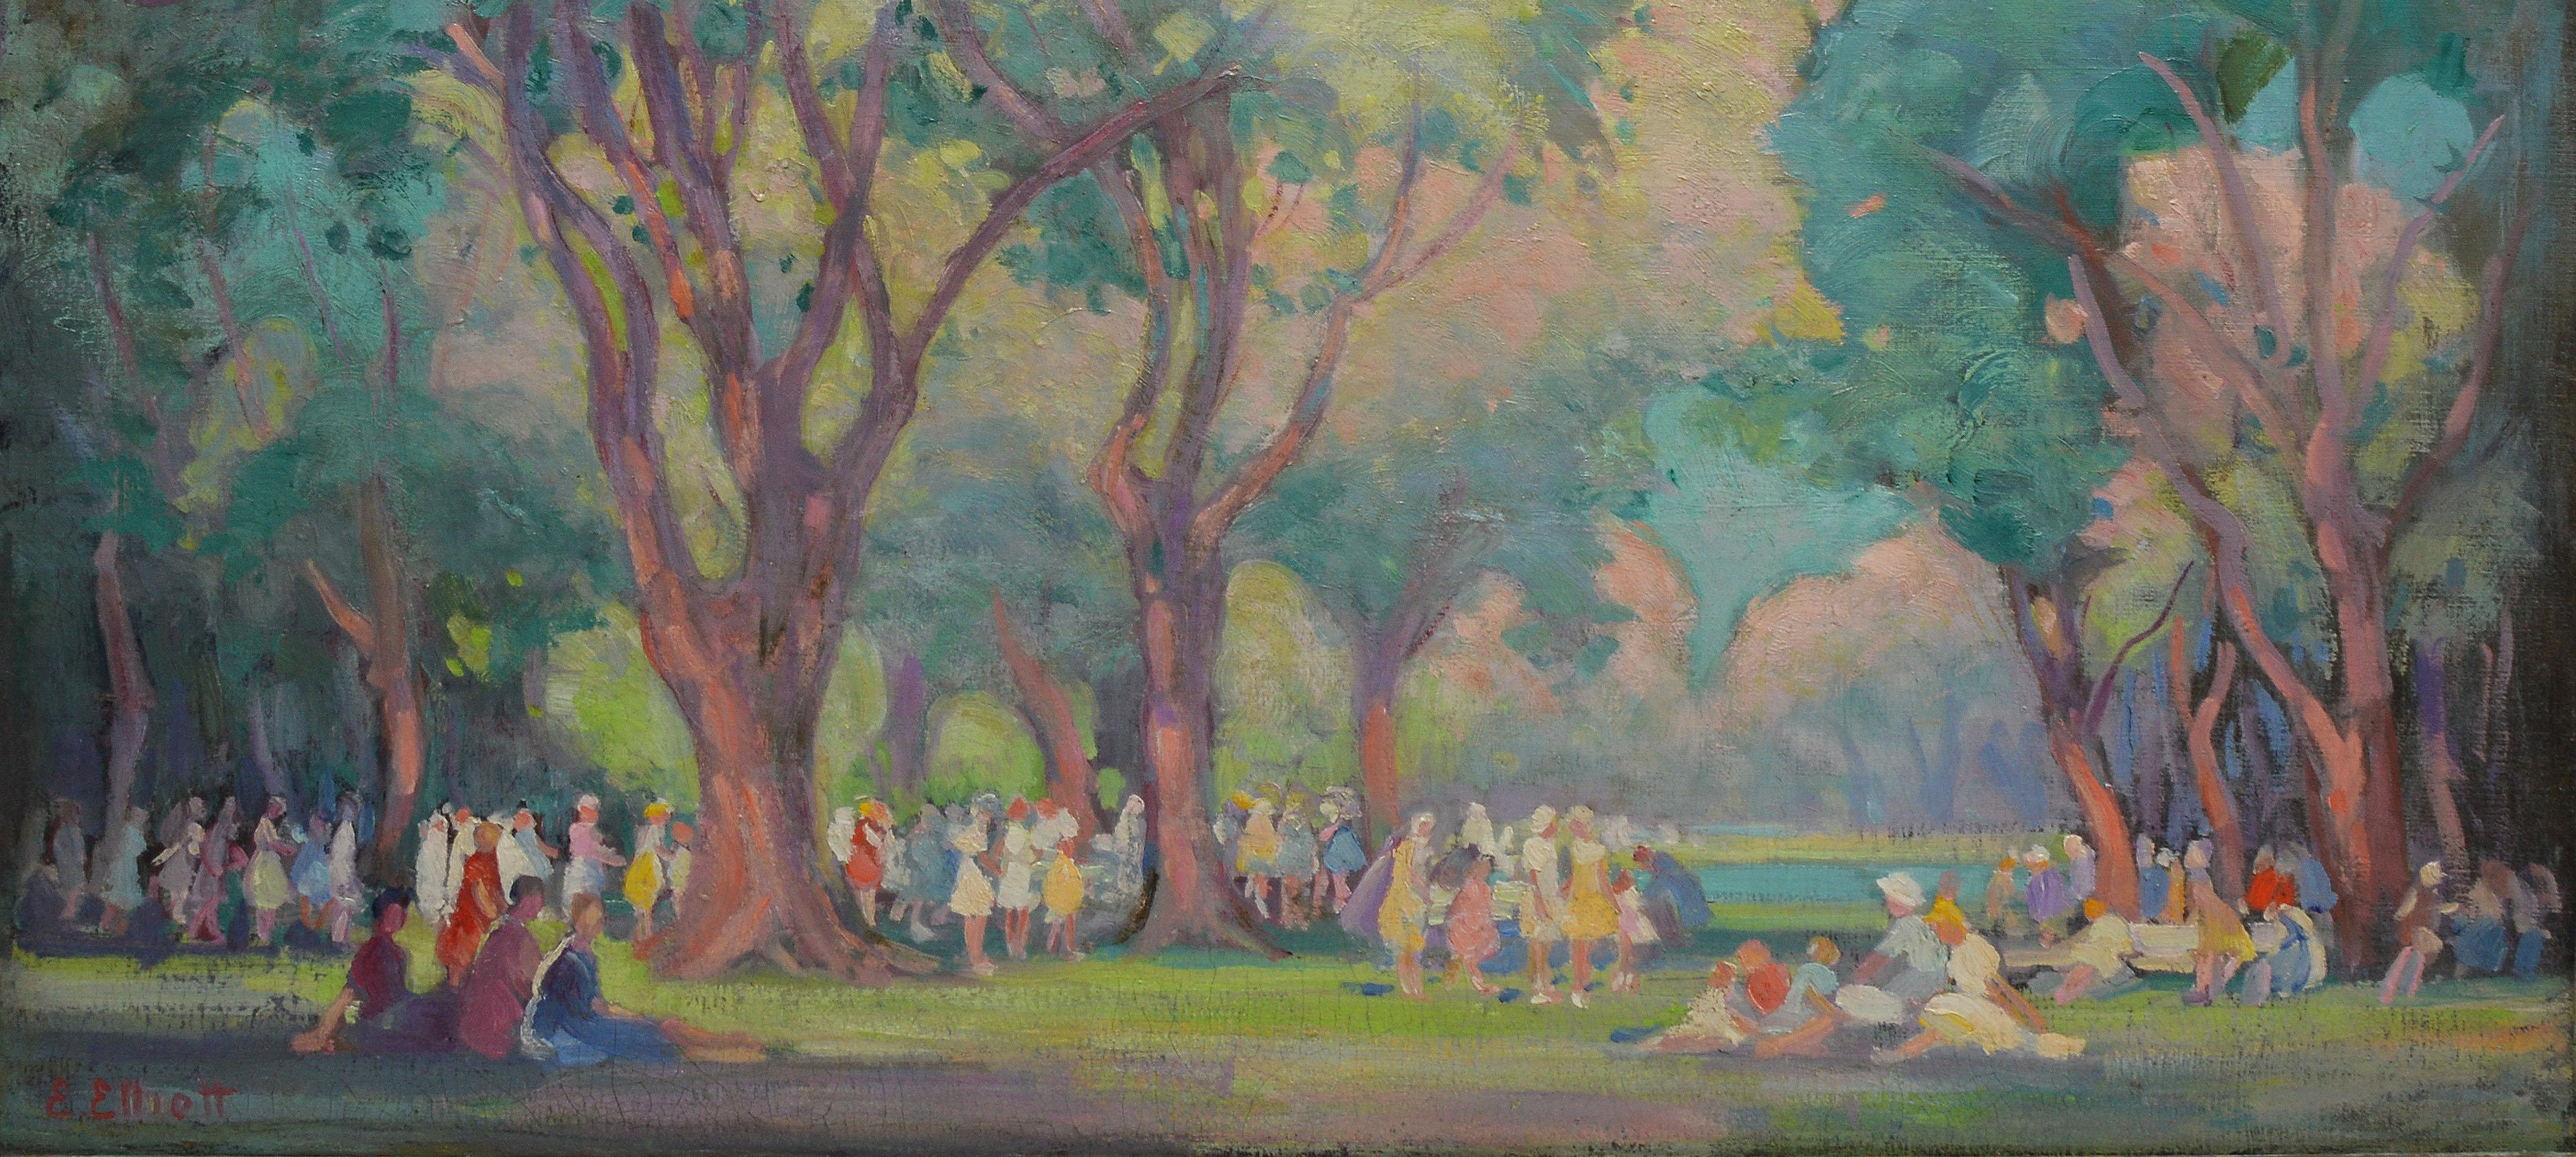 Antique American school impressionsit park landscape painting.  Oil on board, circa 1900.  Signed lower left.
 Displayed in a period impressionist frame.  Image size, 32